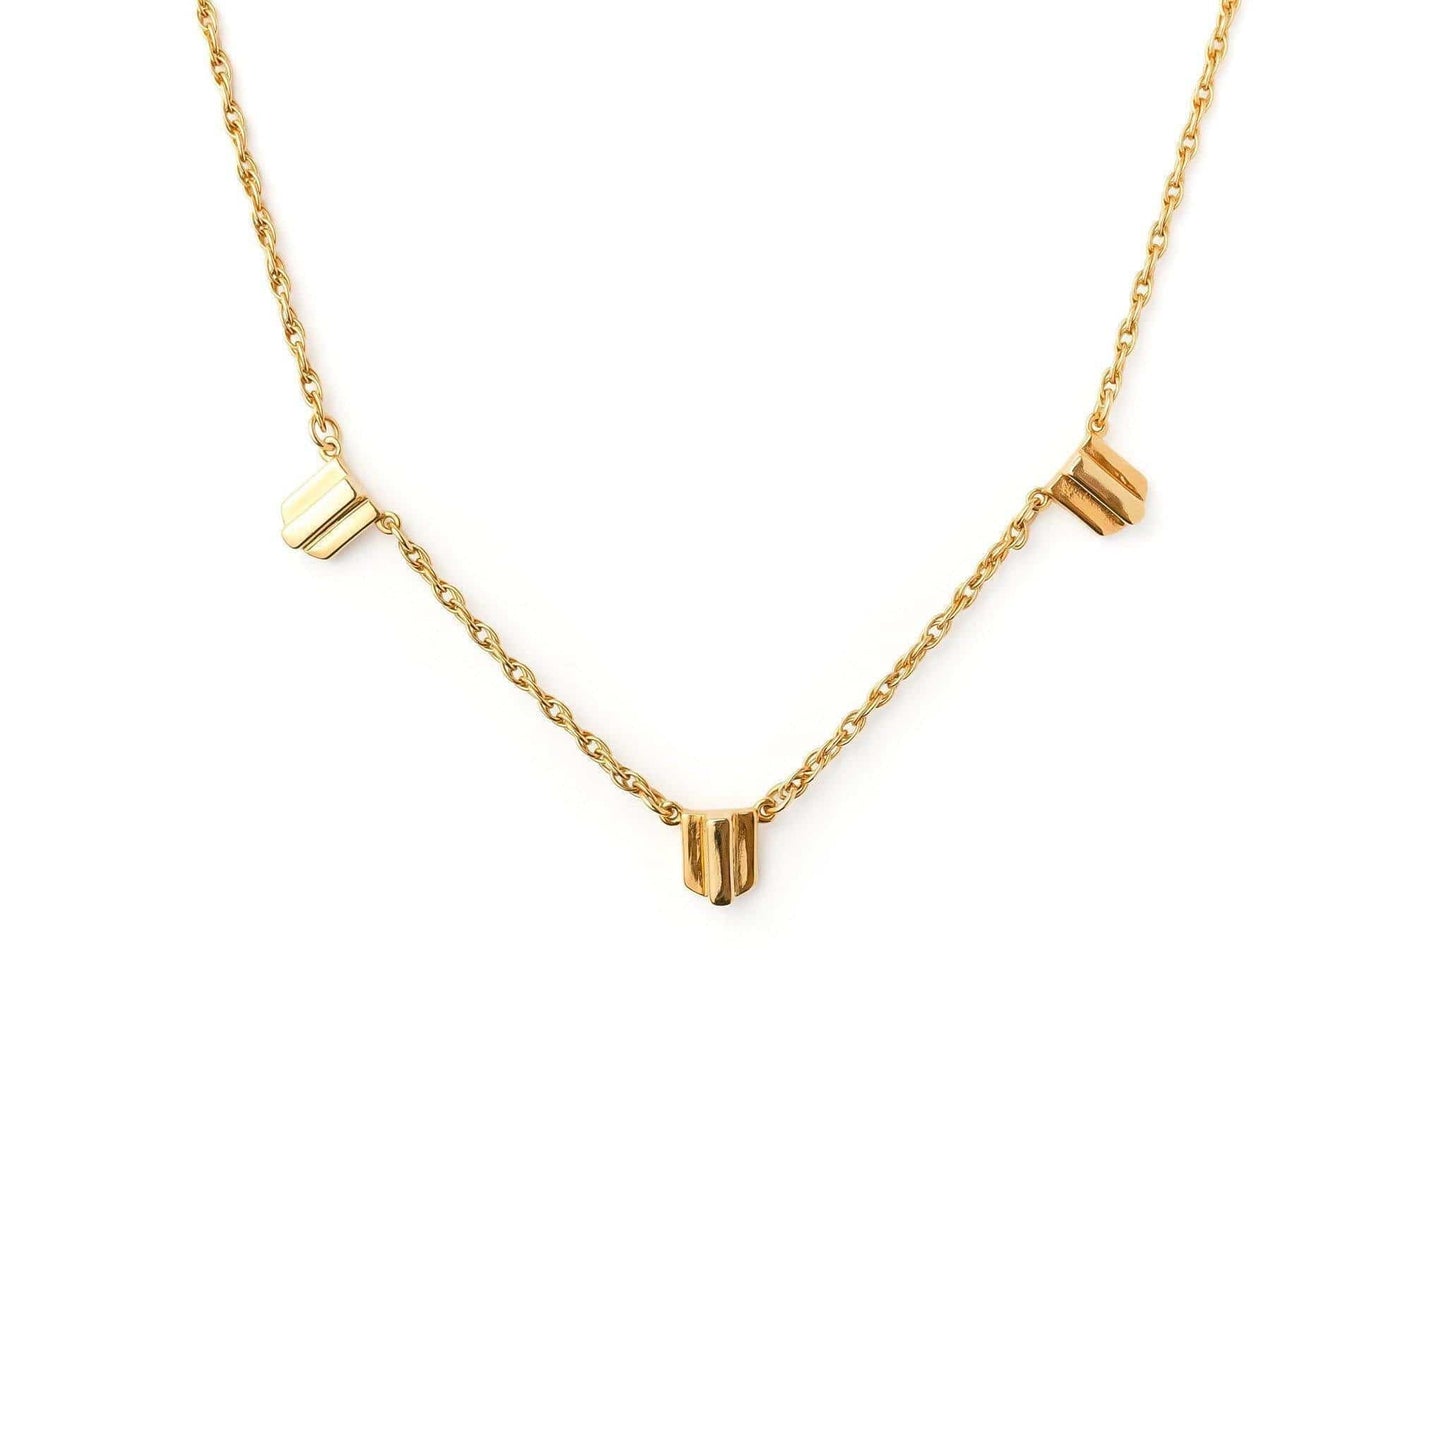 Gold Dome Pendant Necklace